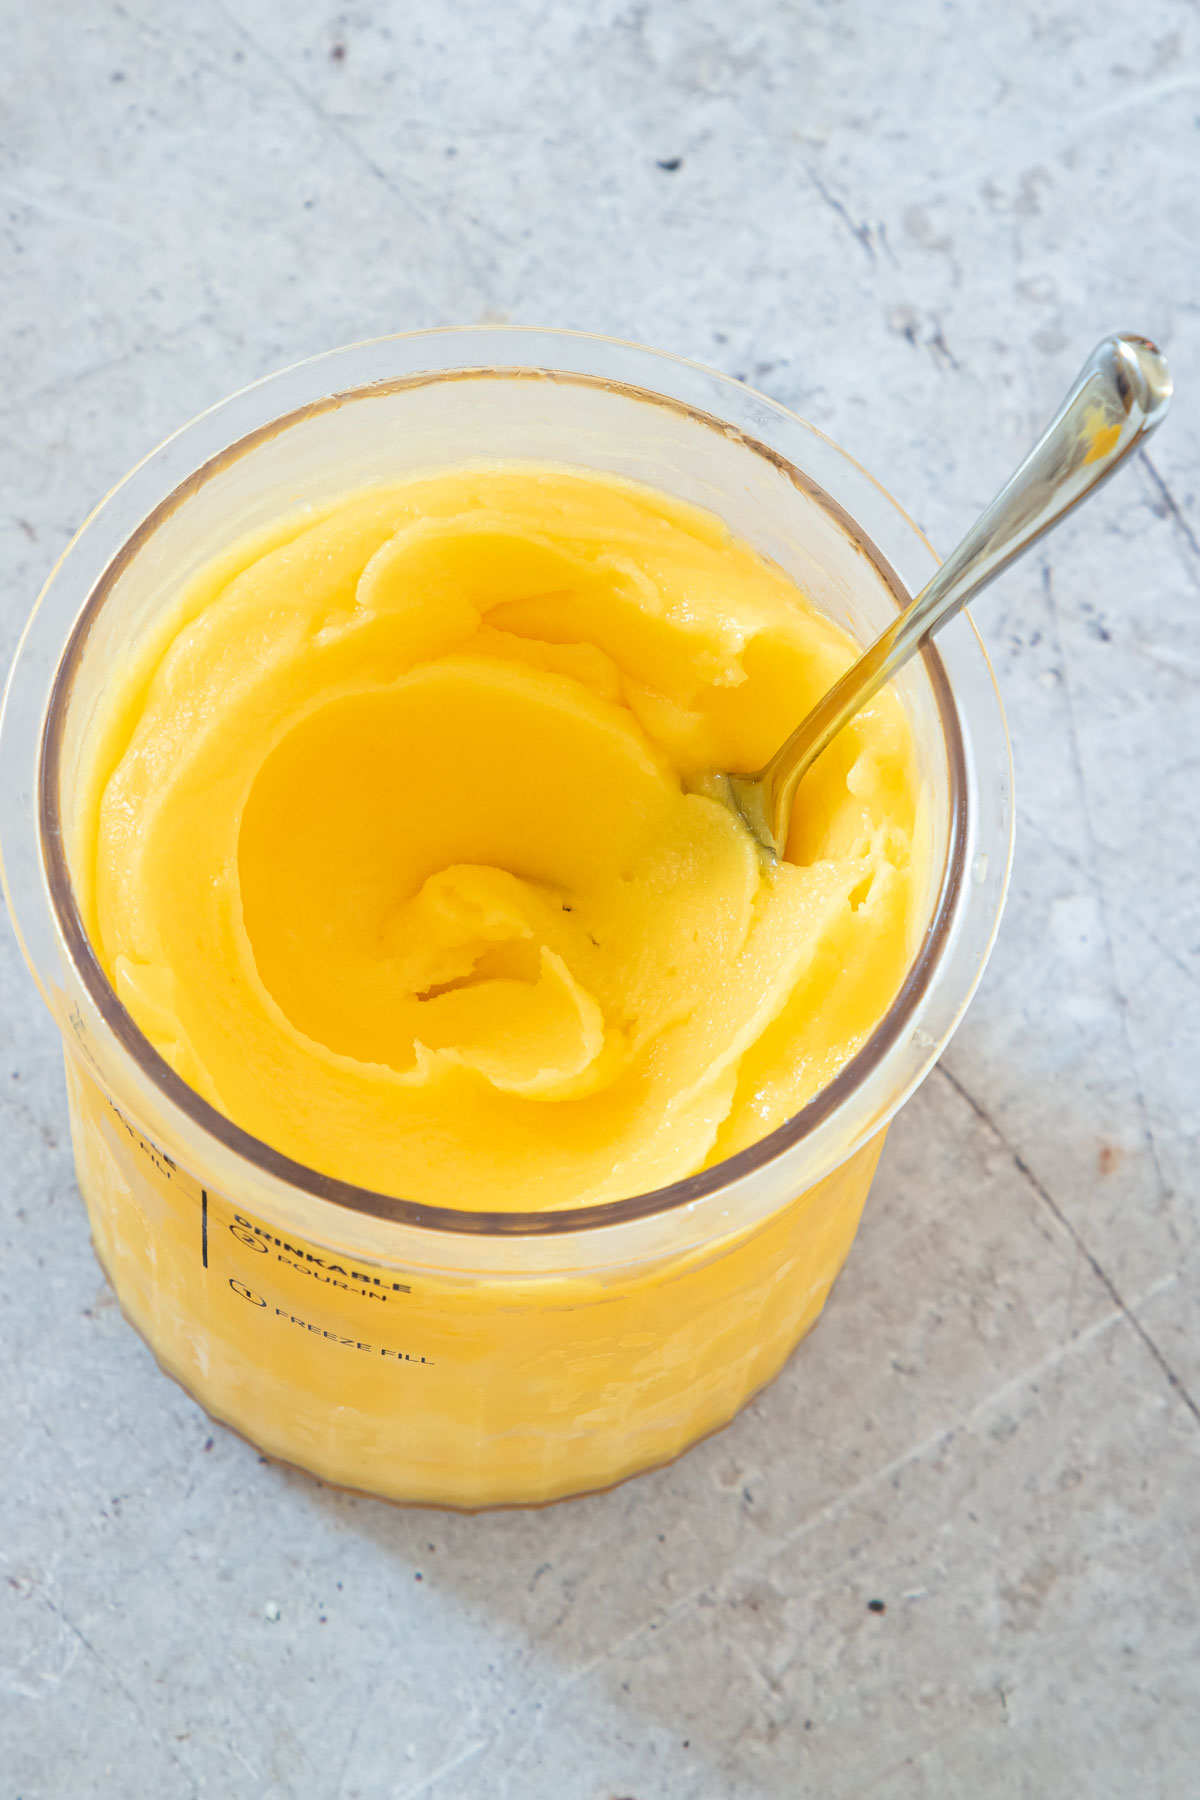 the completed mango sorbet in a pint container with a serving spoon.